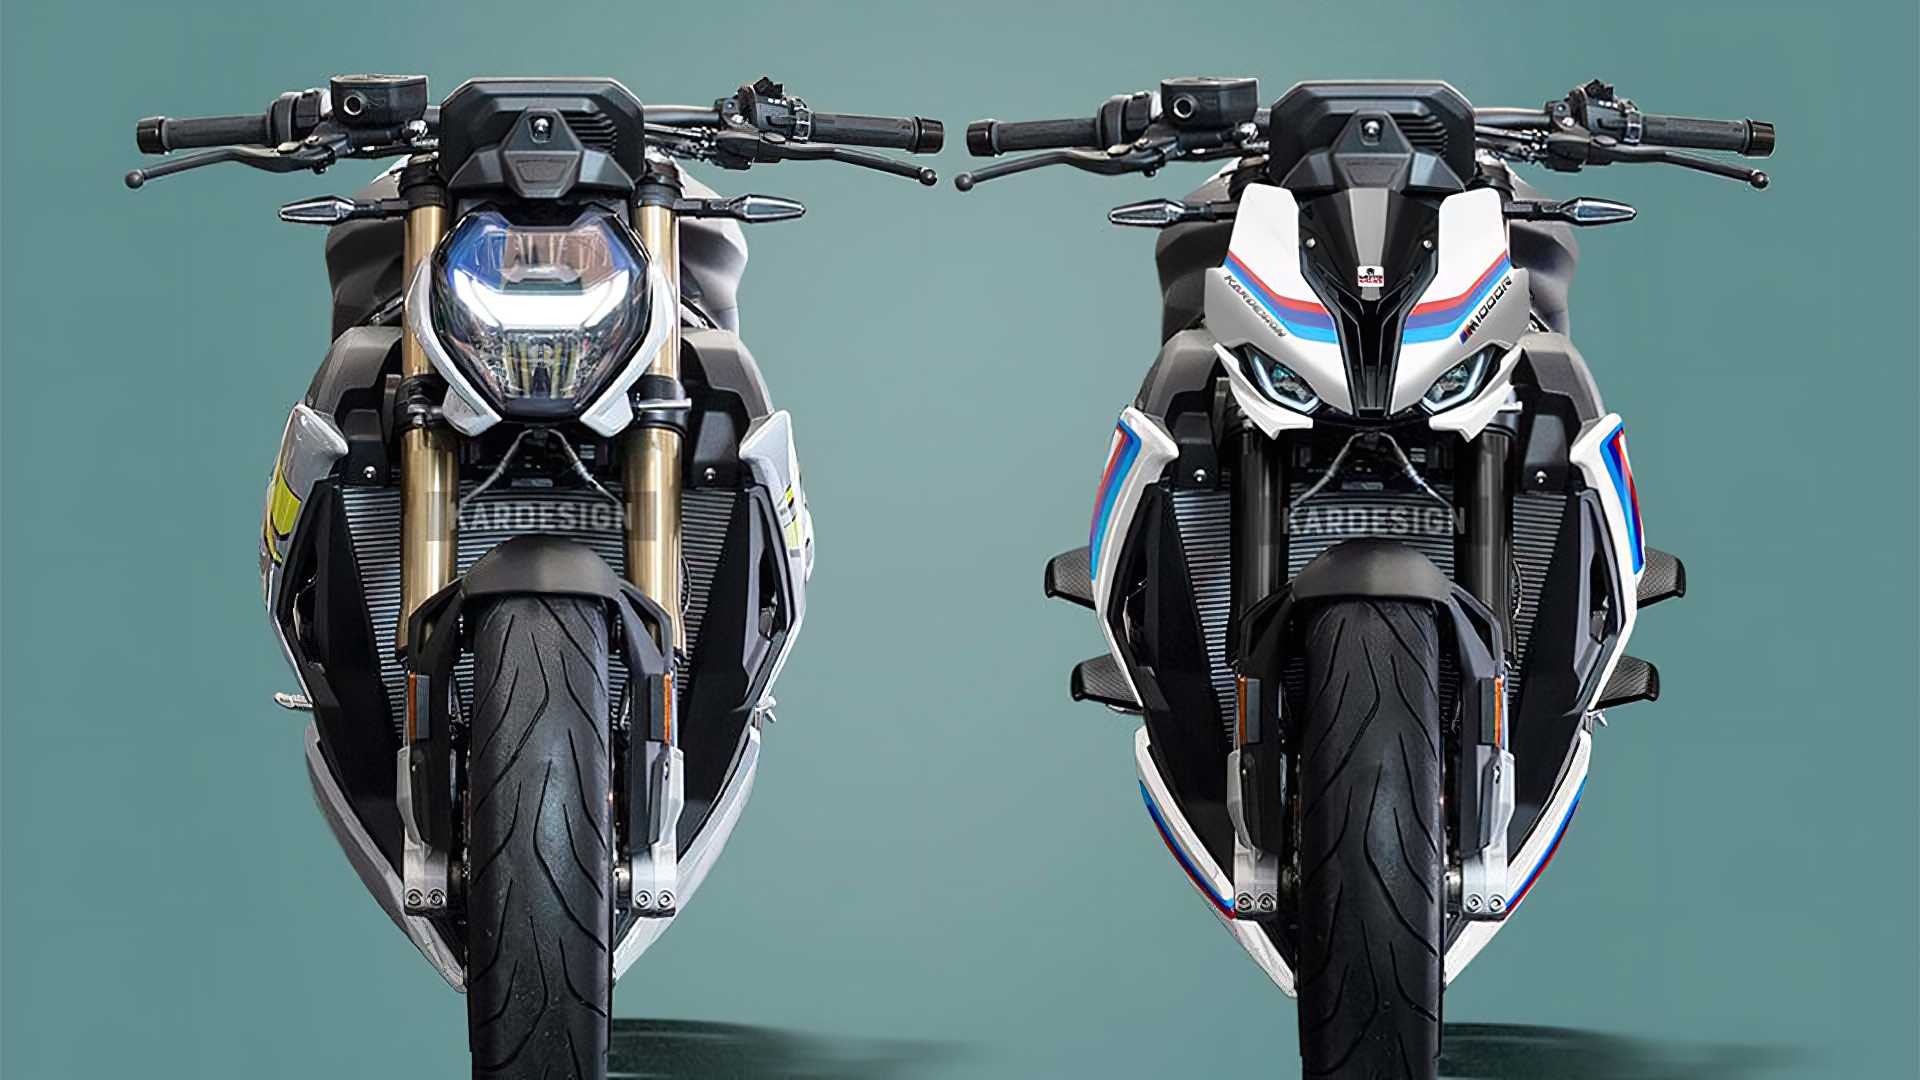 BMW M 1000 R is coming - MOTORCYCLES.NEWS